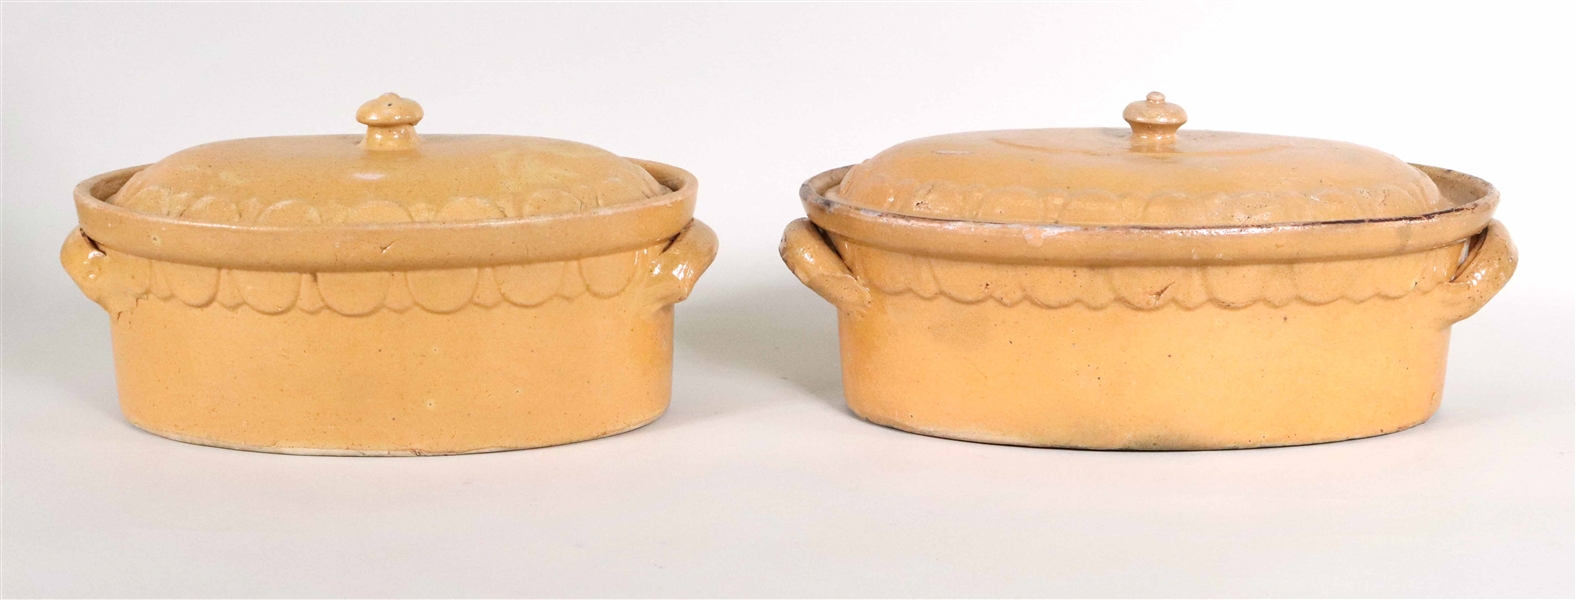 Two Similar Alsace Stoneware Covered Pots